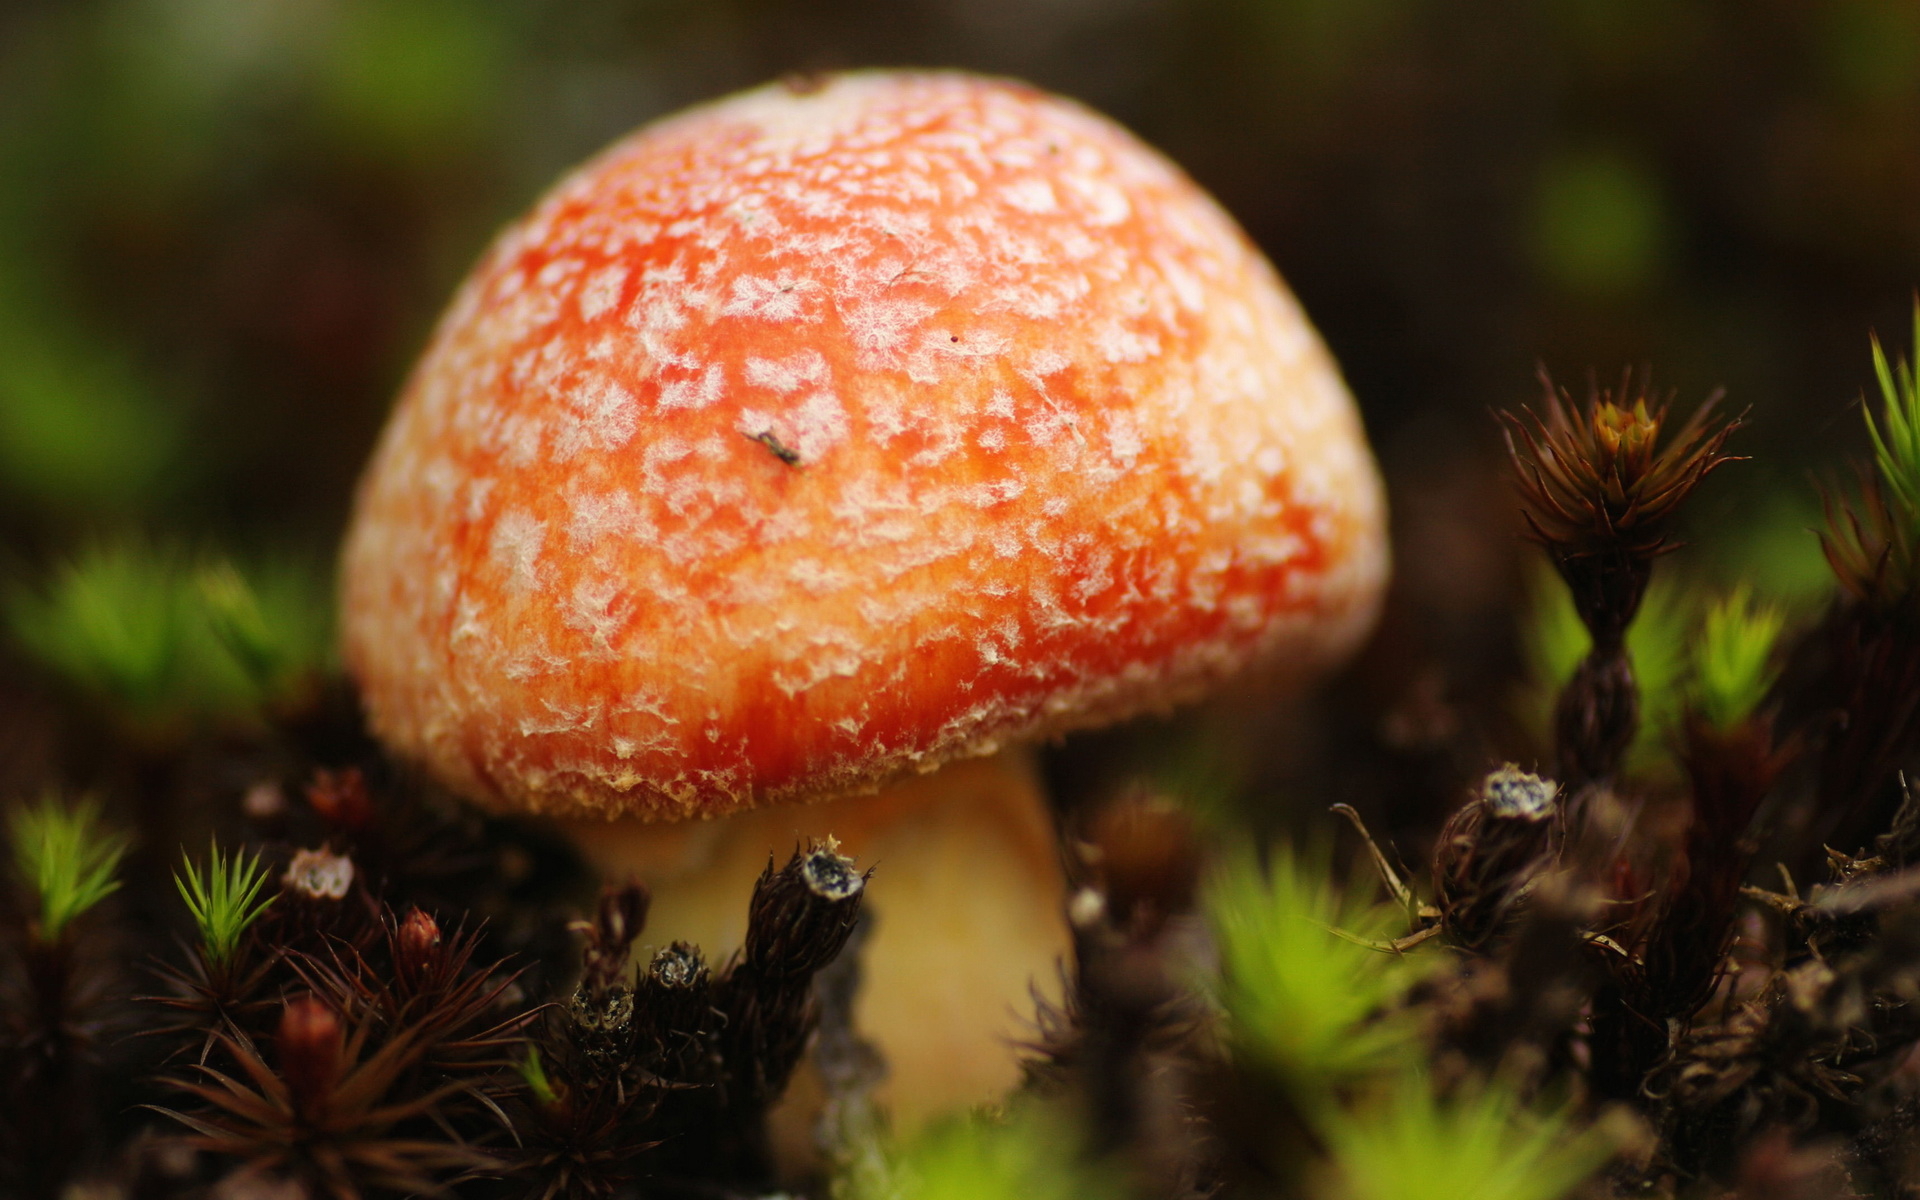 Small Mushroom Wallpaper And Image Pictures Photos